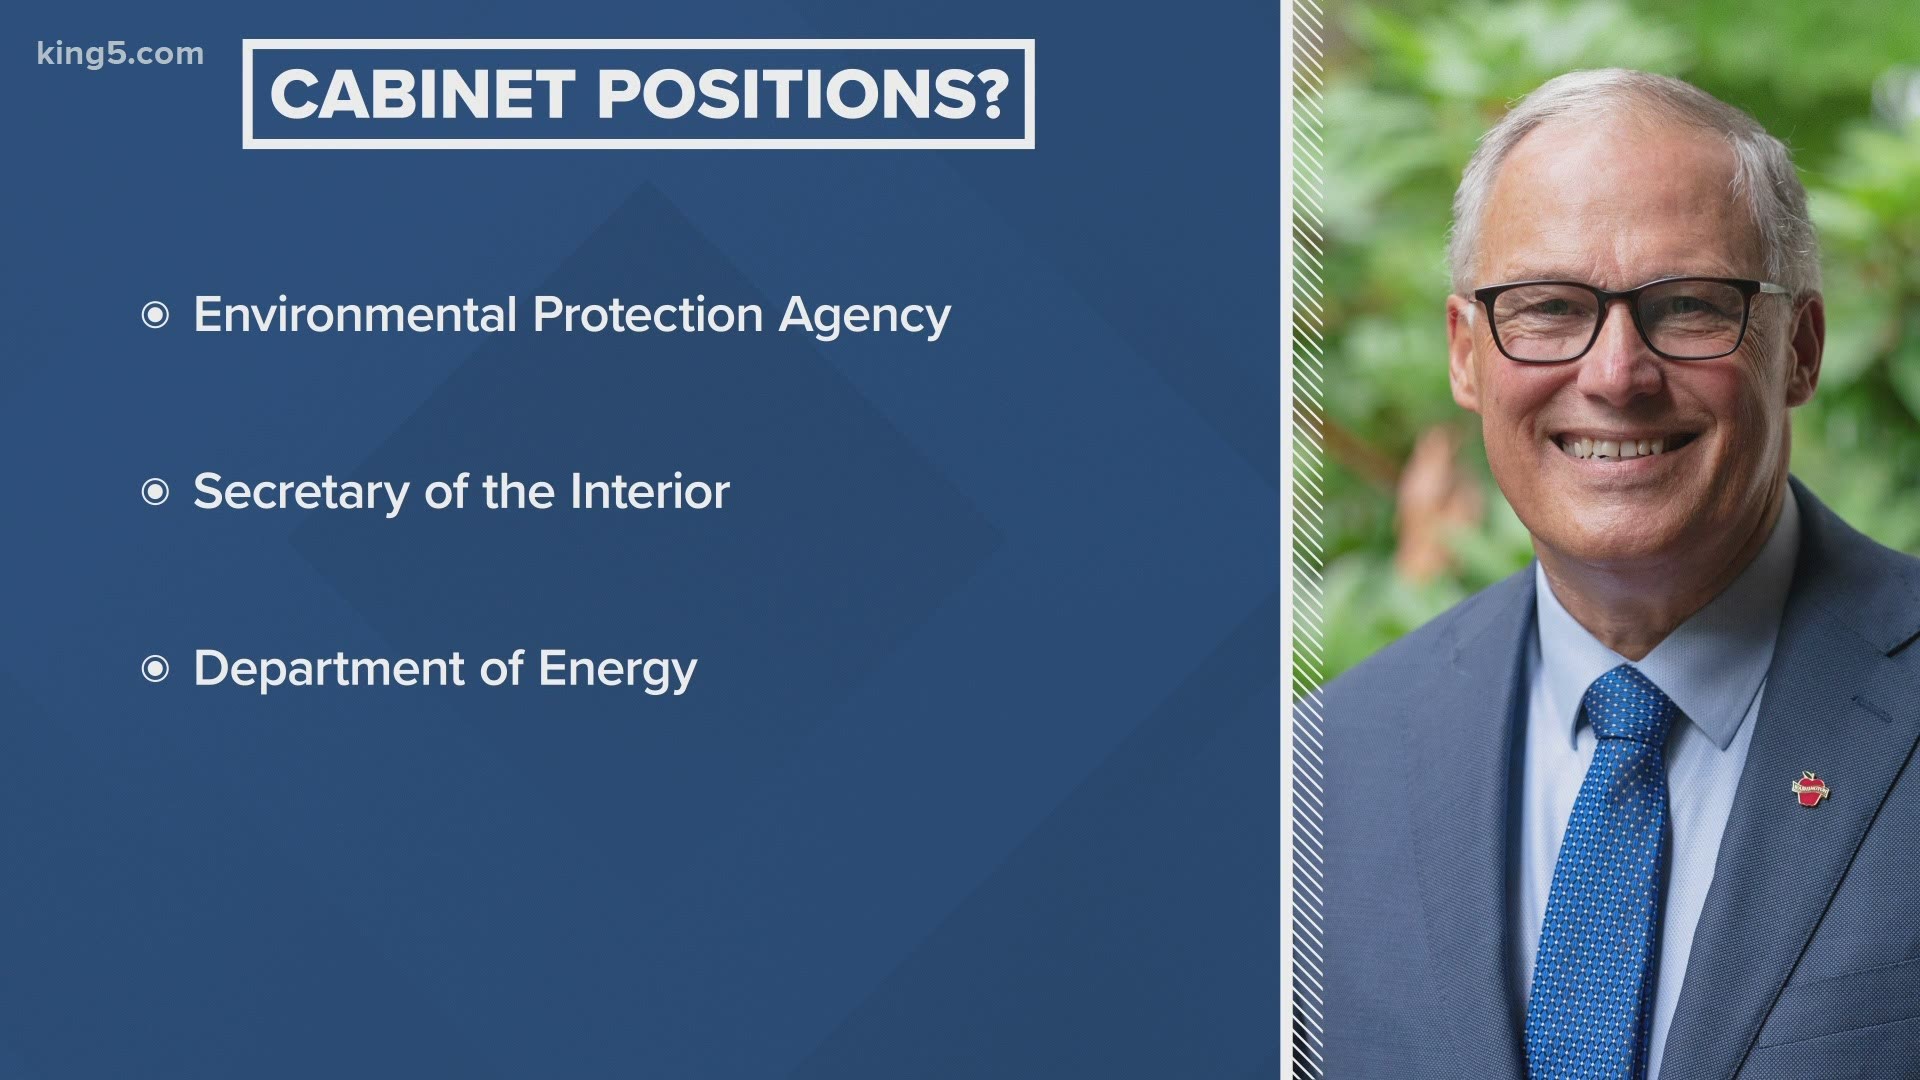 Several news outlets reported Gov. Jay Inslee’s name has come up in conversations about positions for head of the EPA or Department of Energy.